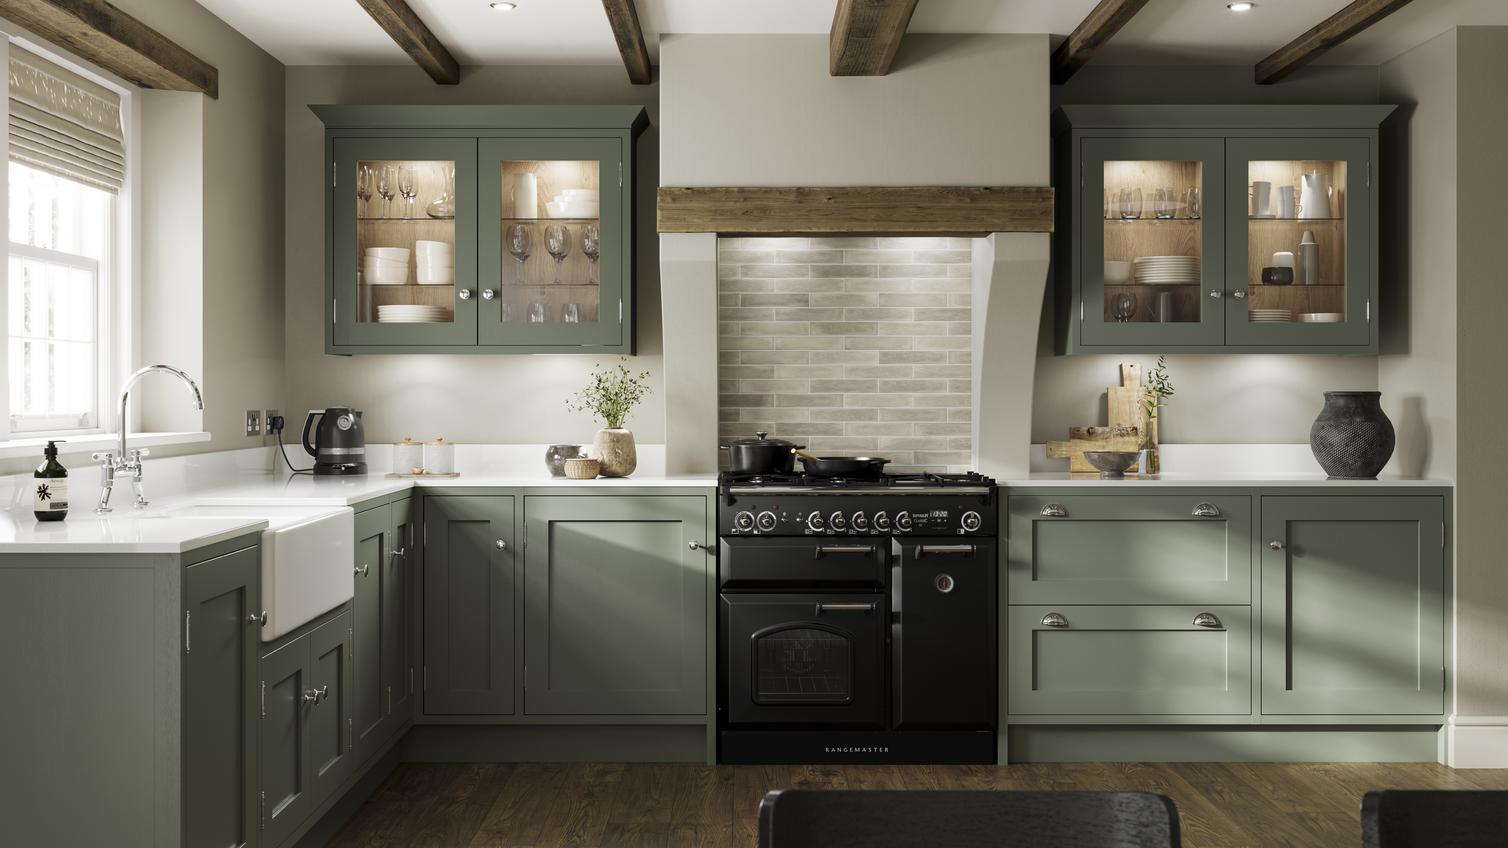 A reed green kitchen design in an open-plan layout with dark wood floors, shaker doors, a range cooker, and a ceramic sink.